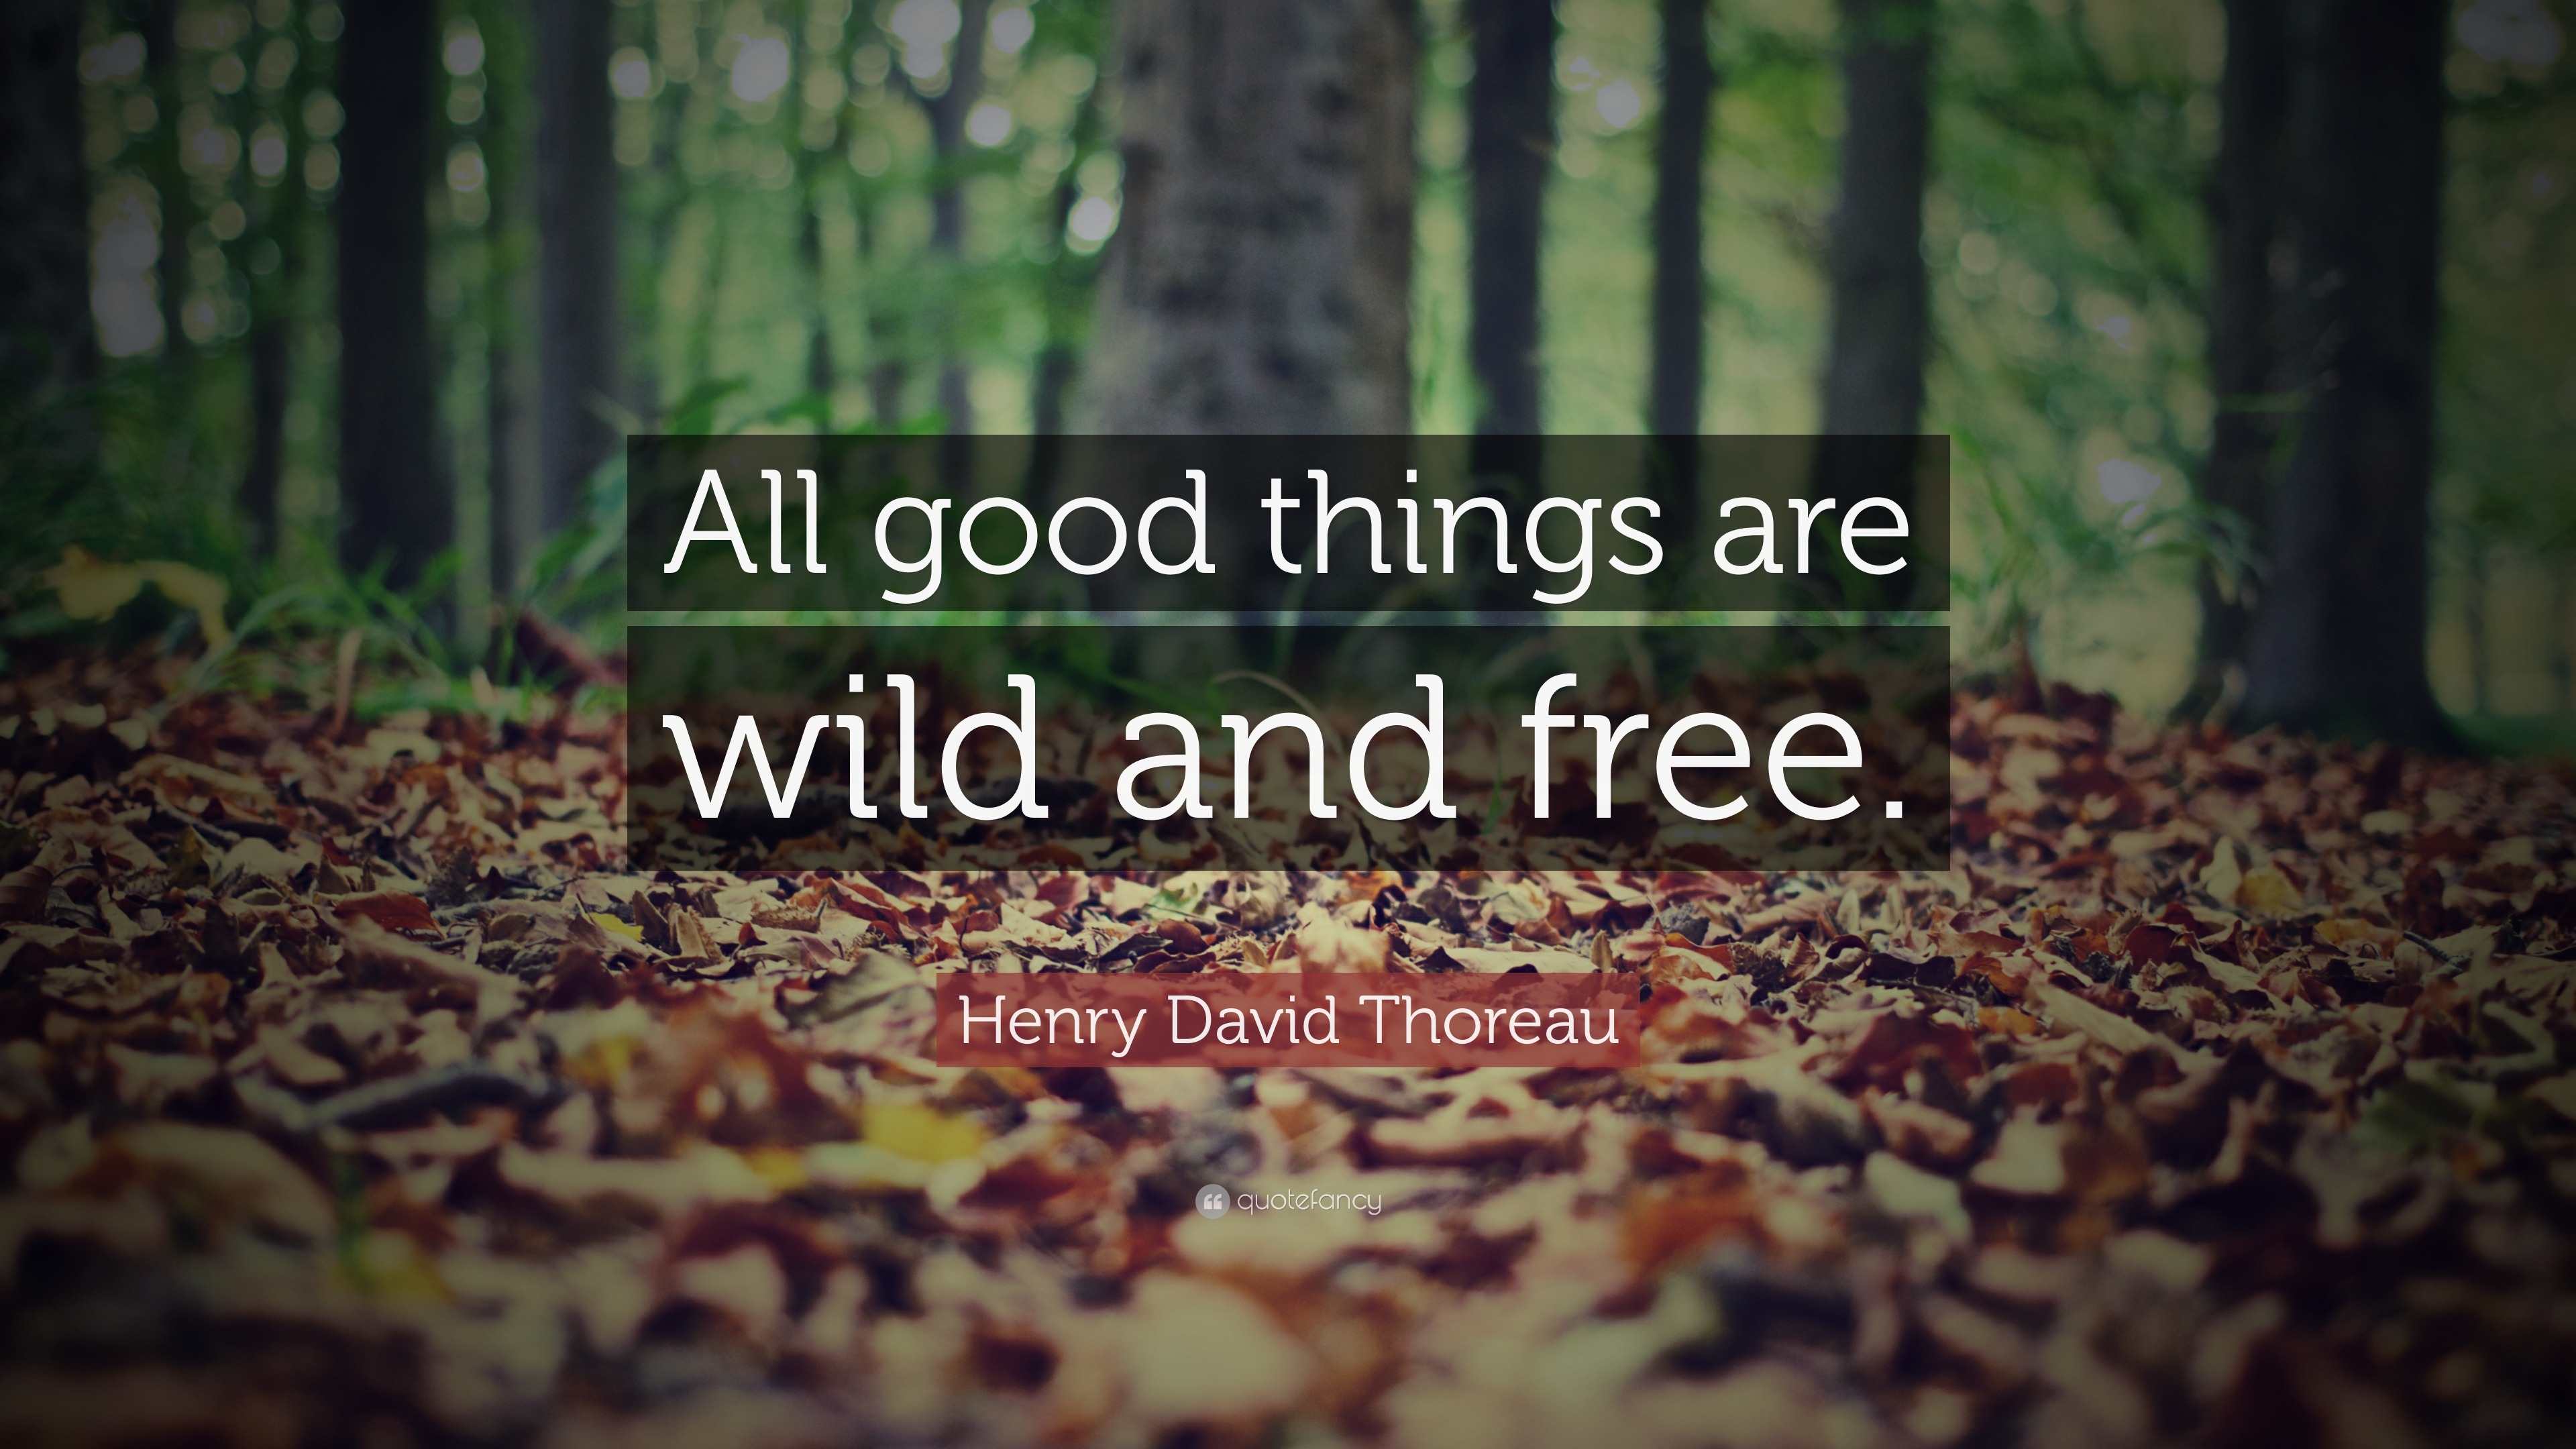 Henry David Thoreau Quote: "All good things are wild and ...